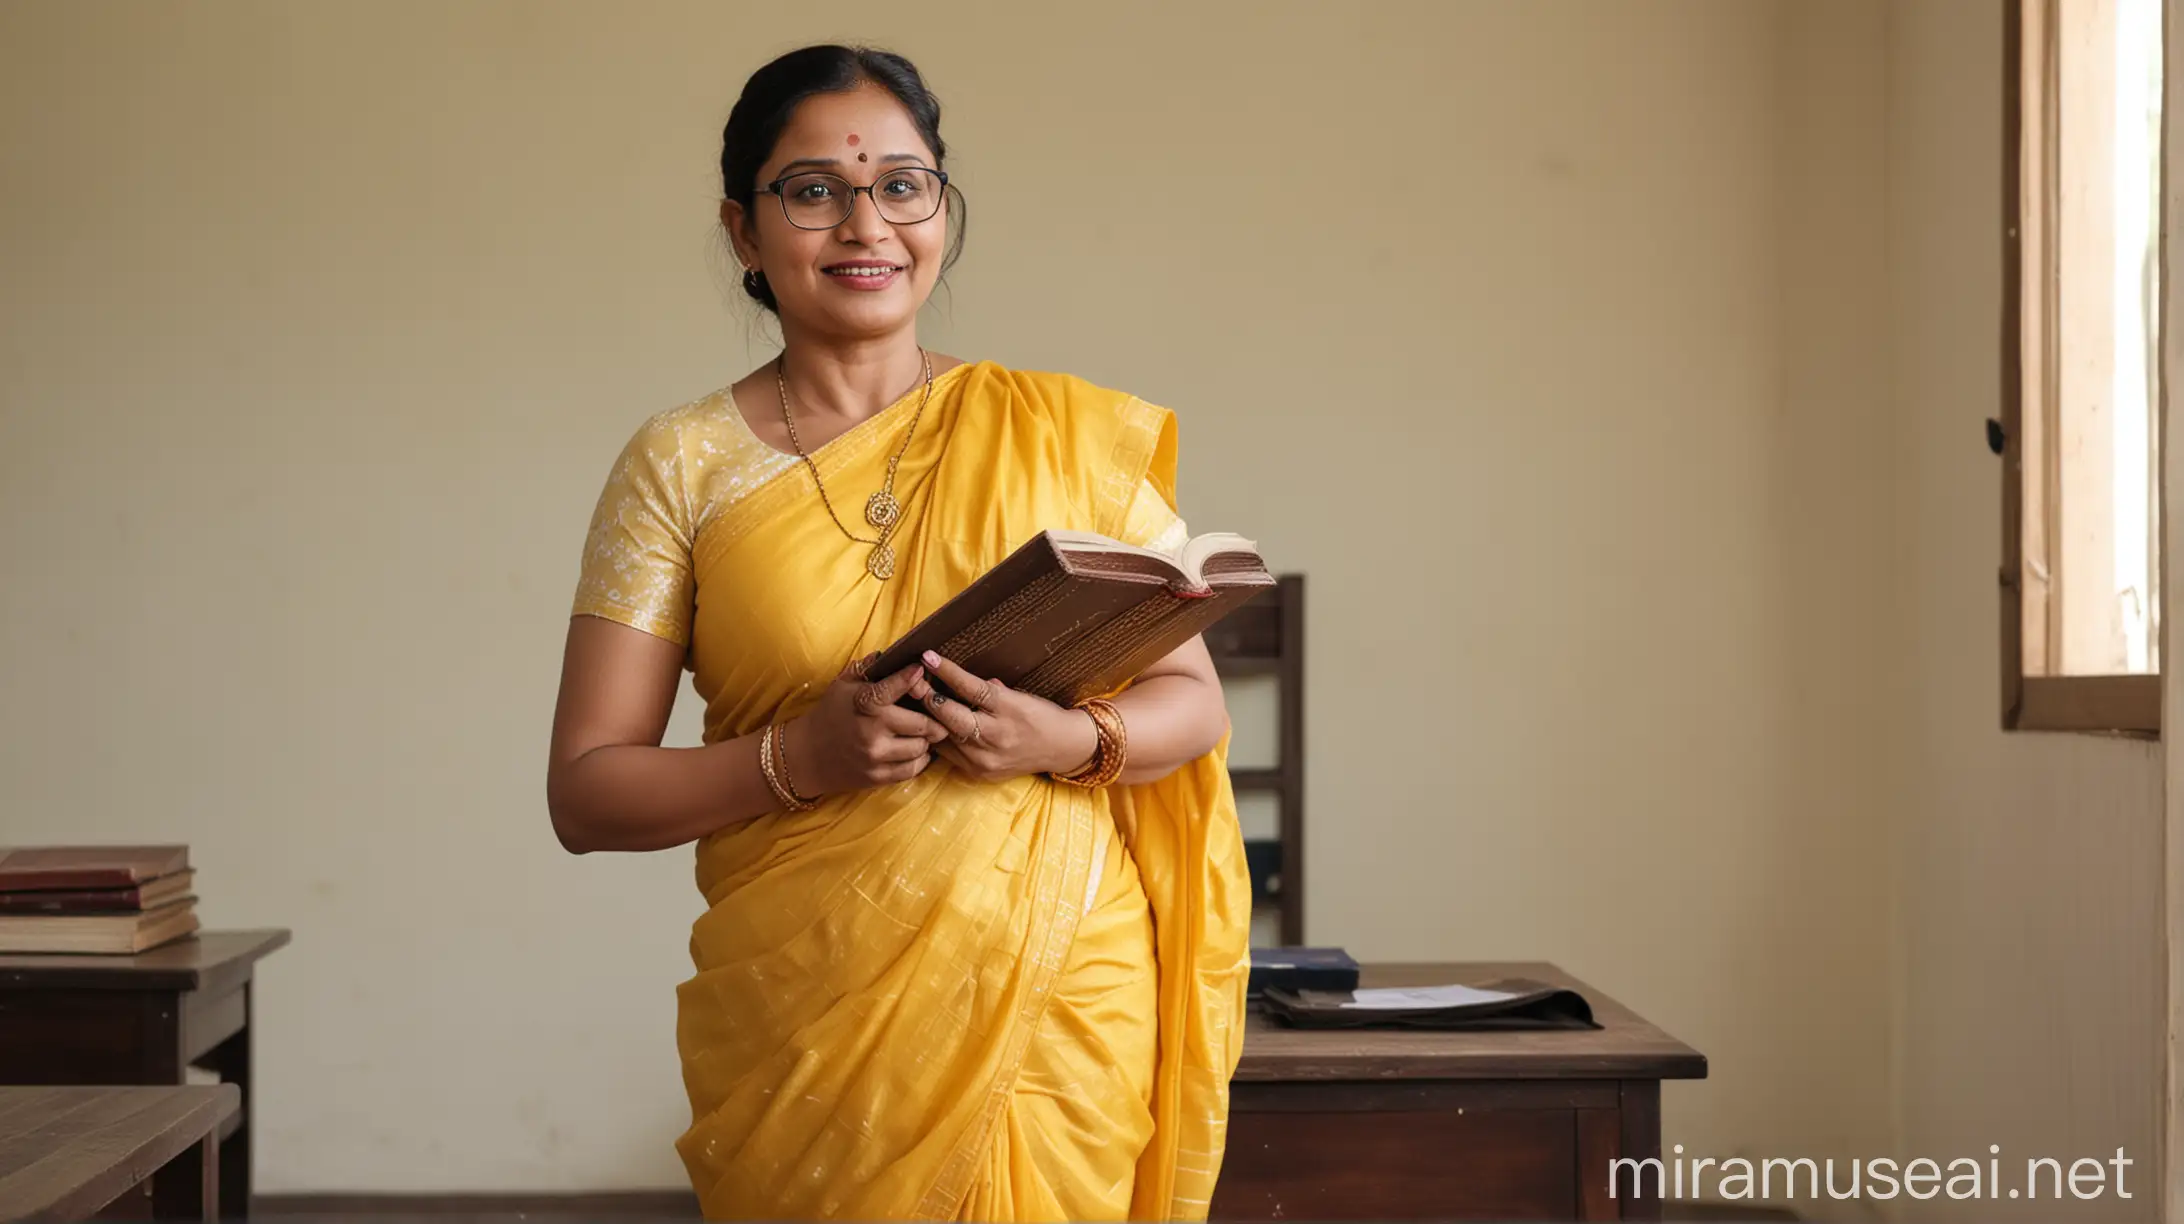 Surprised Indian Teacher Mom Holding Book in Classroom